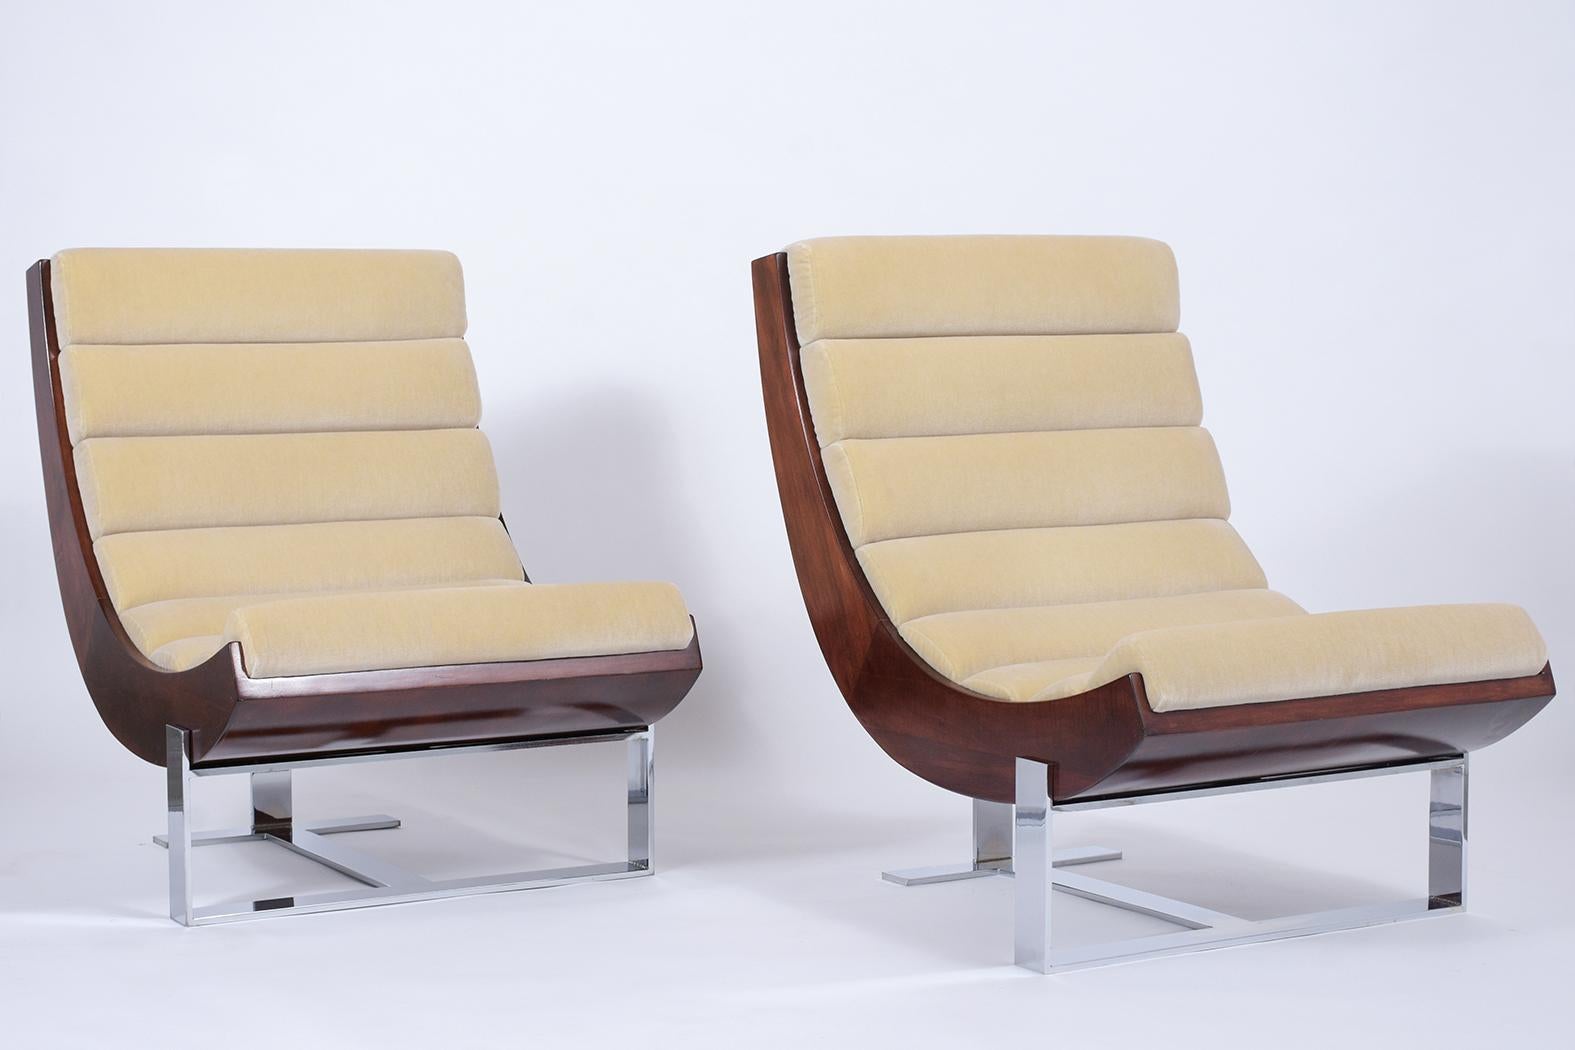 An extraordinary pair of midcentury lounge chairs that are handcrafted out of steel and maple wood combination and features new dark red mahogany color with a lacquered. These club chairs are also professionally reupholstered in a new beige mohair